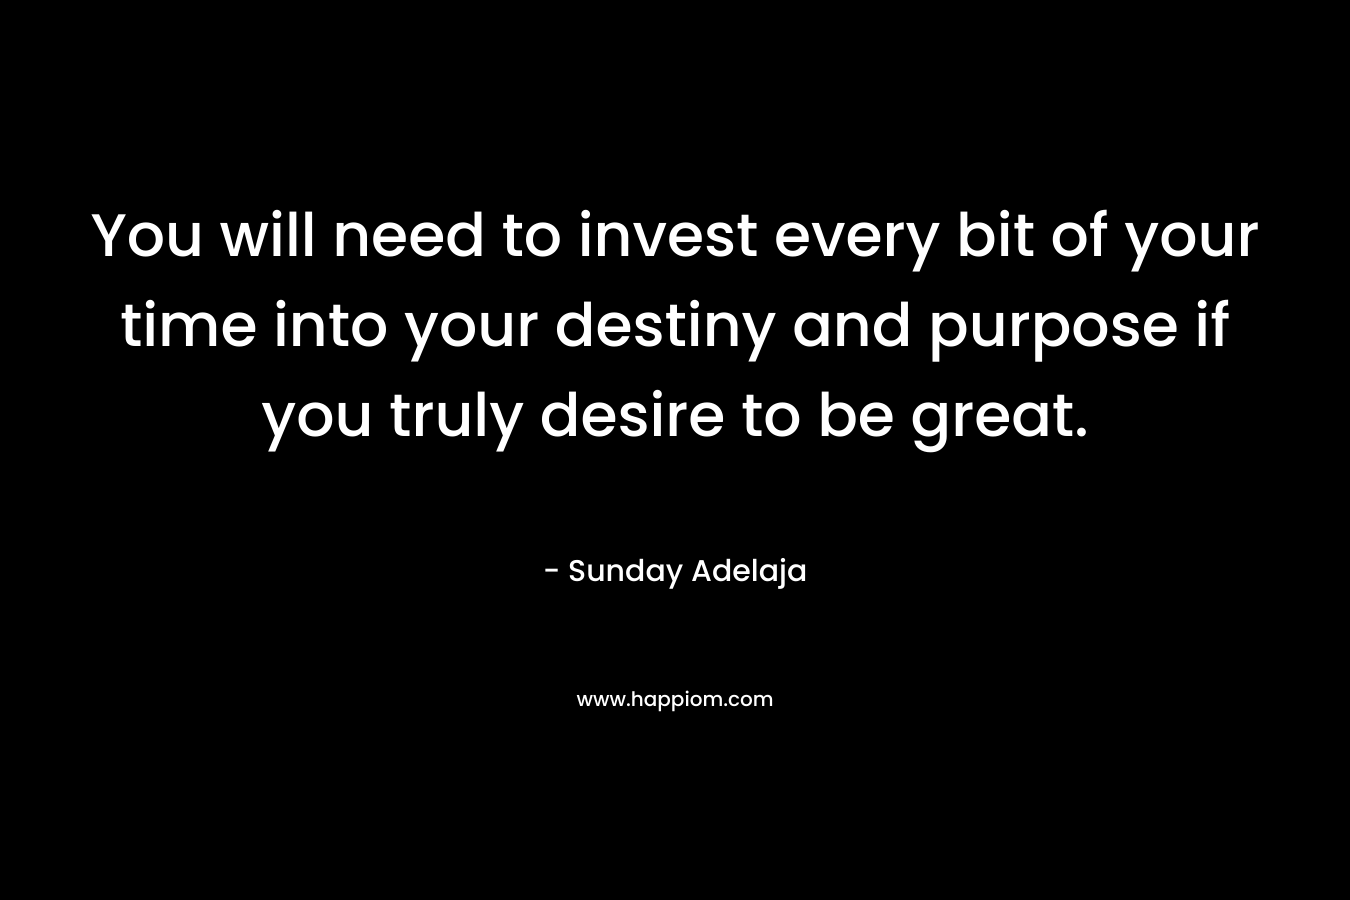 You will need to invest every bit of your time into your destiny and purpose if you truly desire to be great.